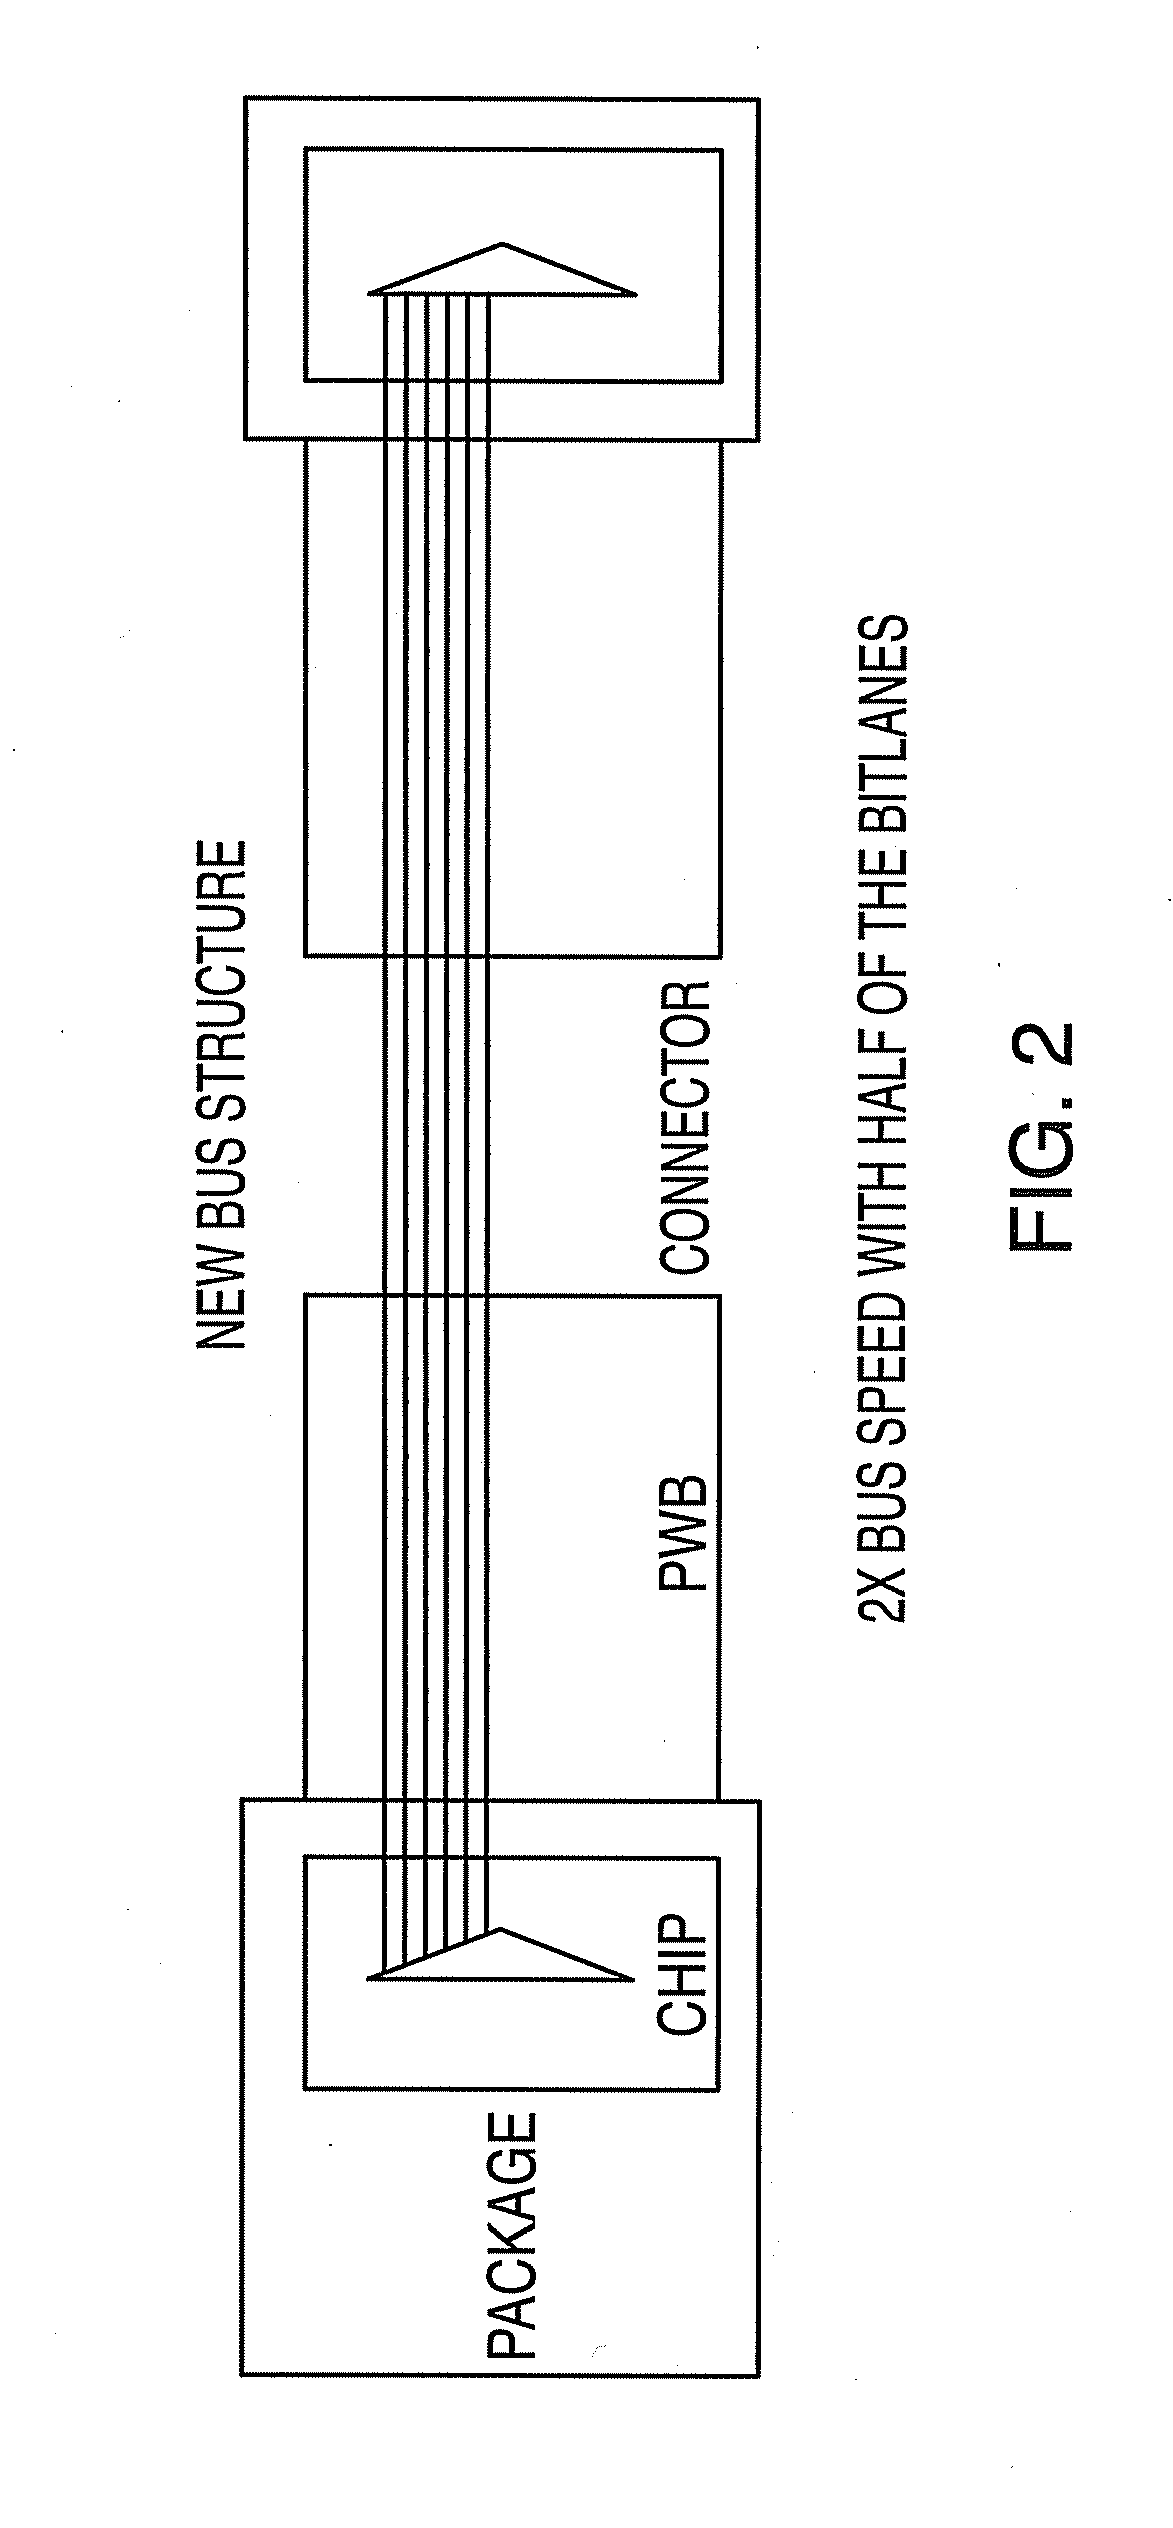 Systems, methods, and computer program products for providing a two-bit symbol bus error correcting code with bus diagnostic features